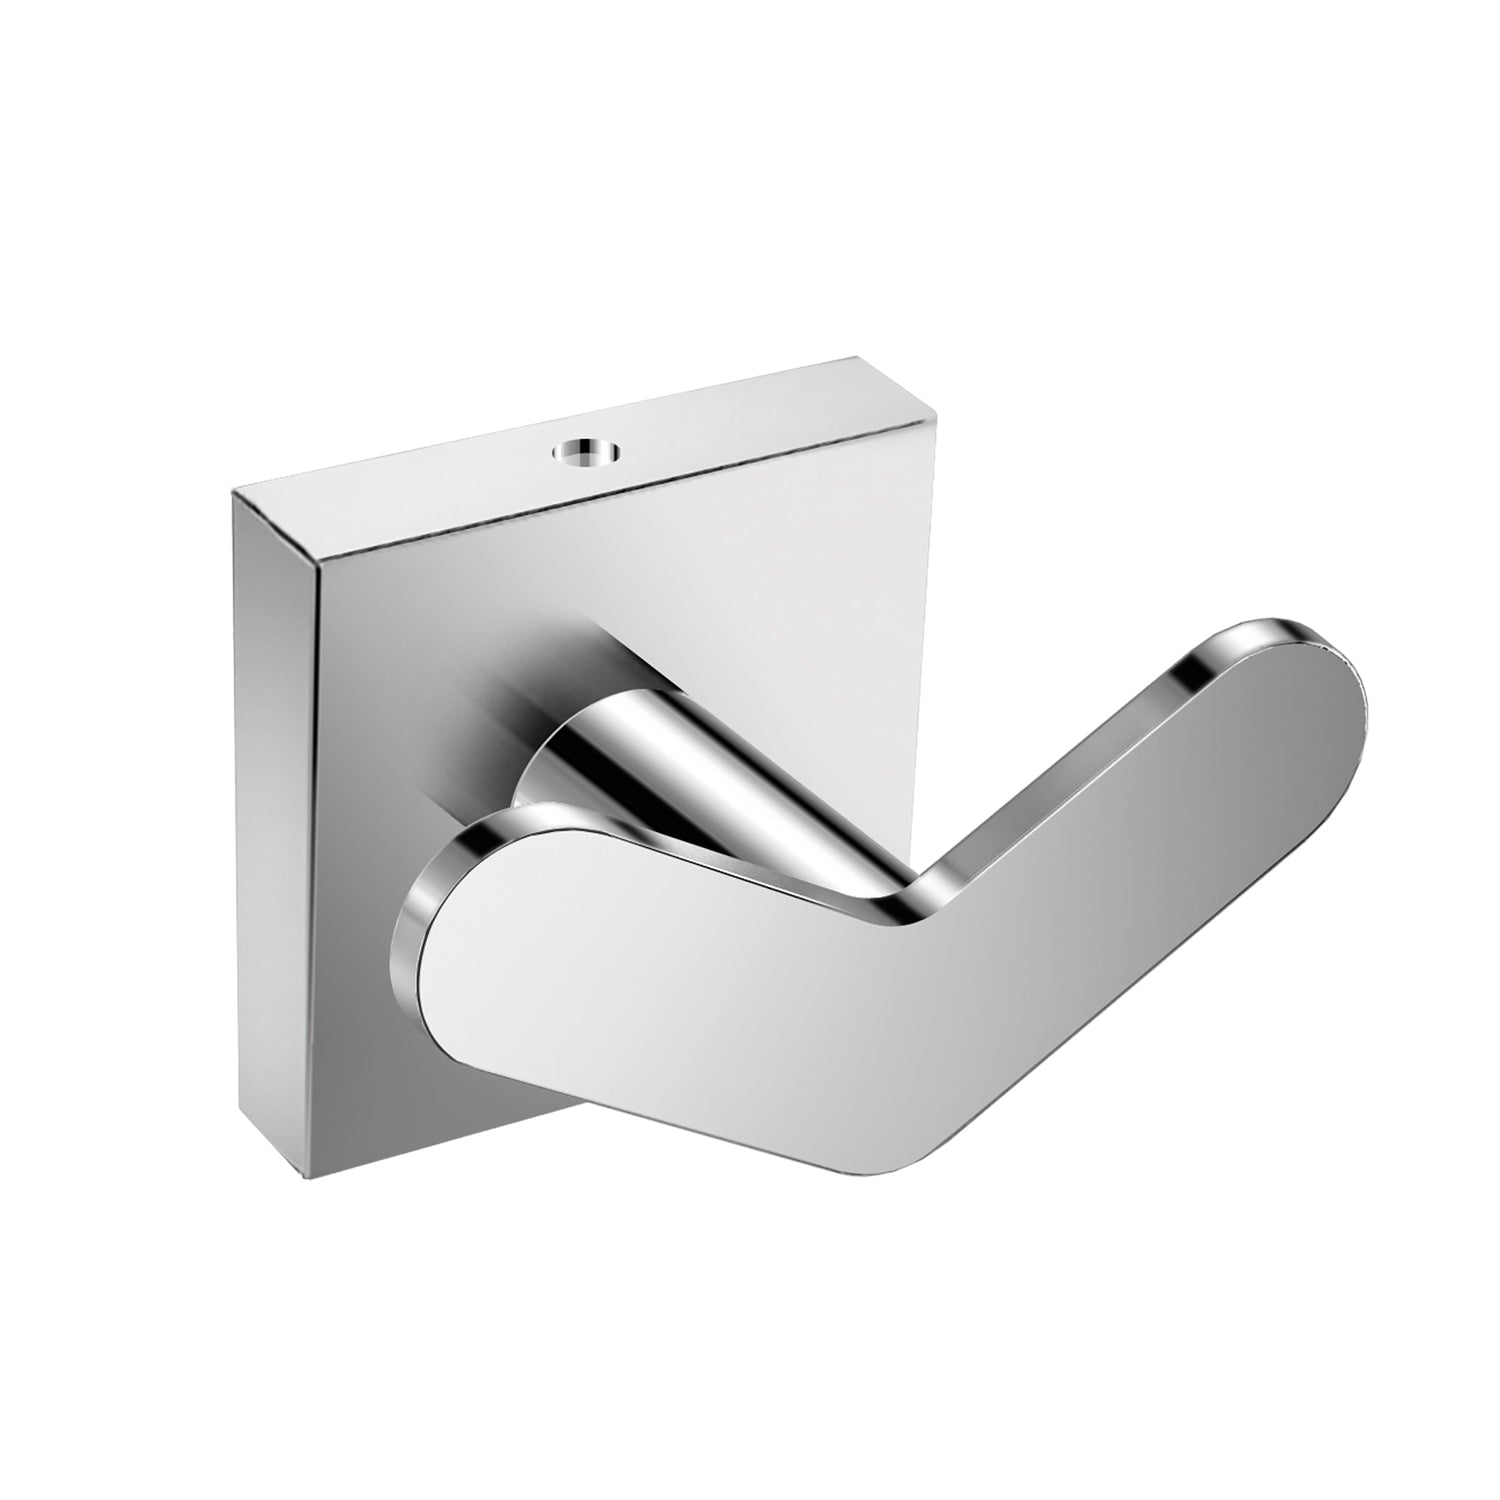 DAX Milano Towel Hook, Wall Mount Stainless Steel, Chrome Finish, 2-9/16 x 1-3/4 x 1-9/16 Inches (DAX-GDC160122-CR)